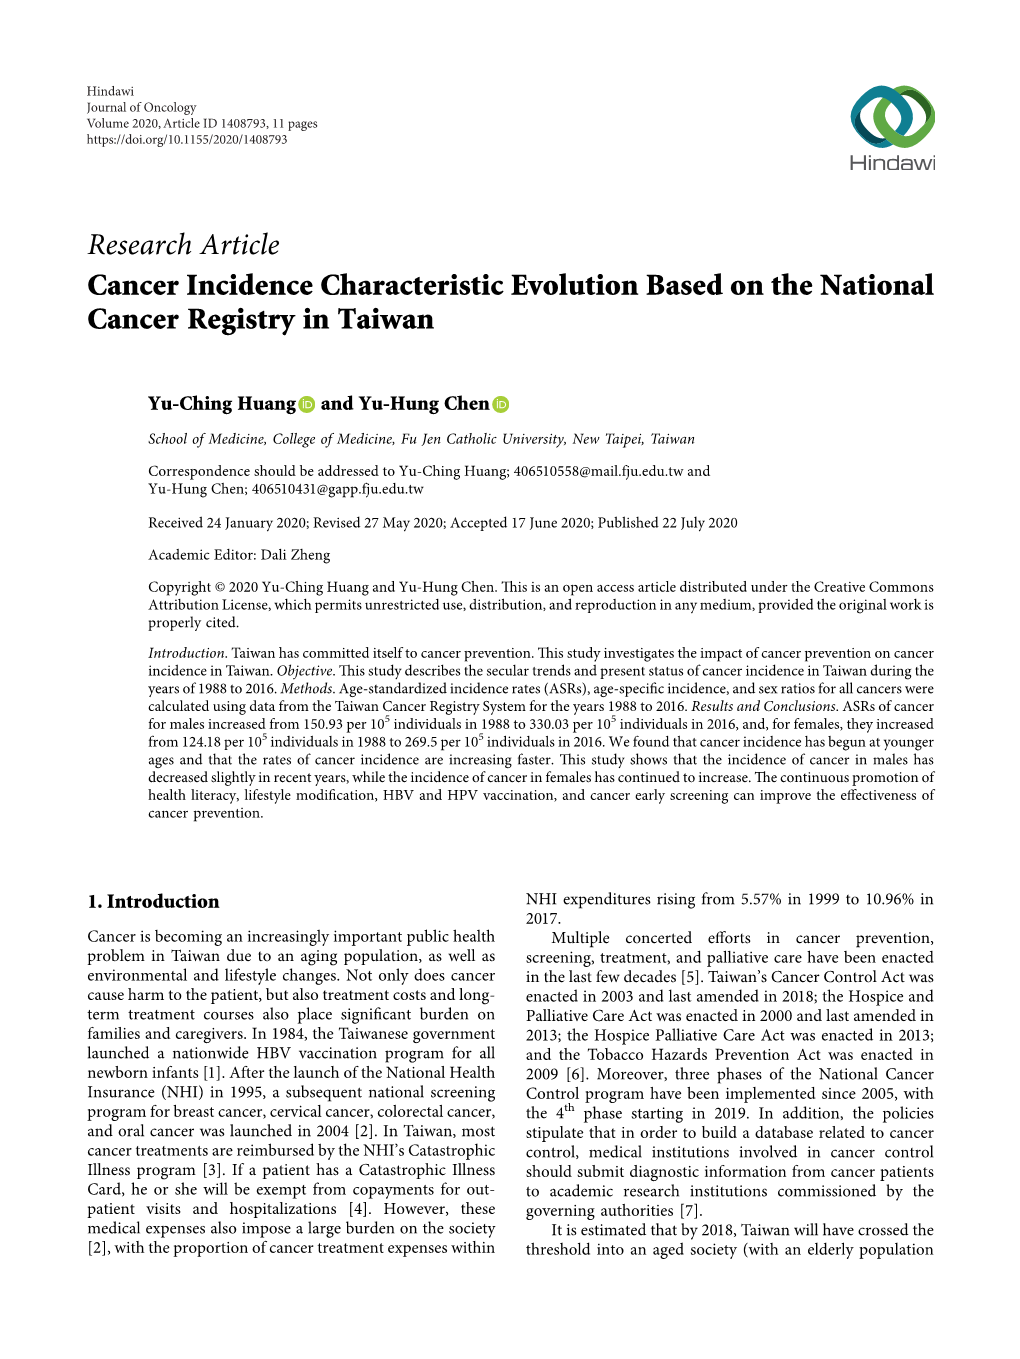 Cancer Incidence Characteristic Evolution Based on the National Cancer Registry in Taiwan